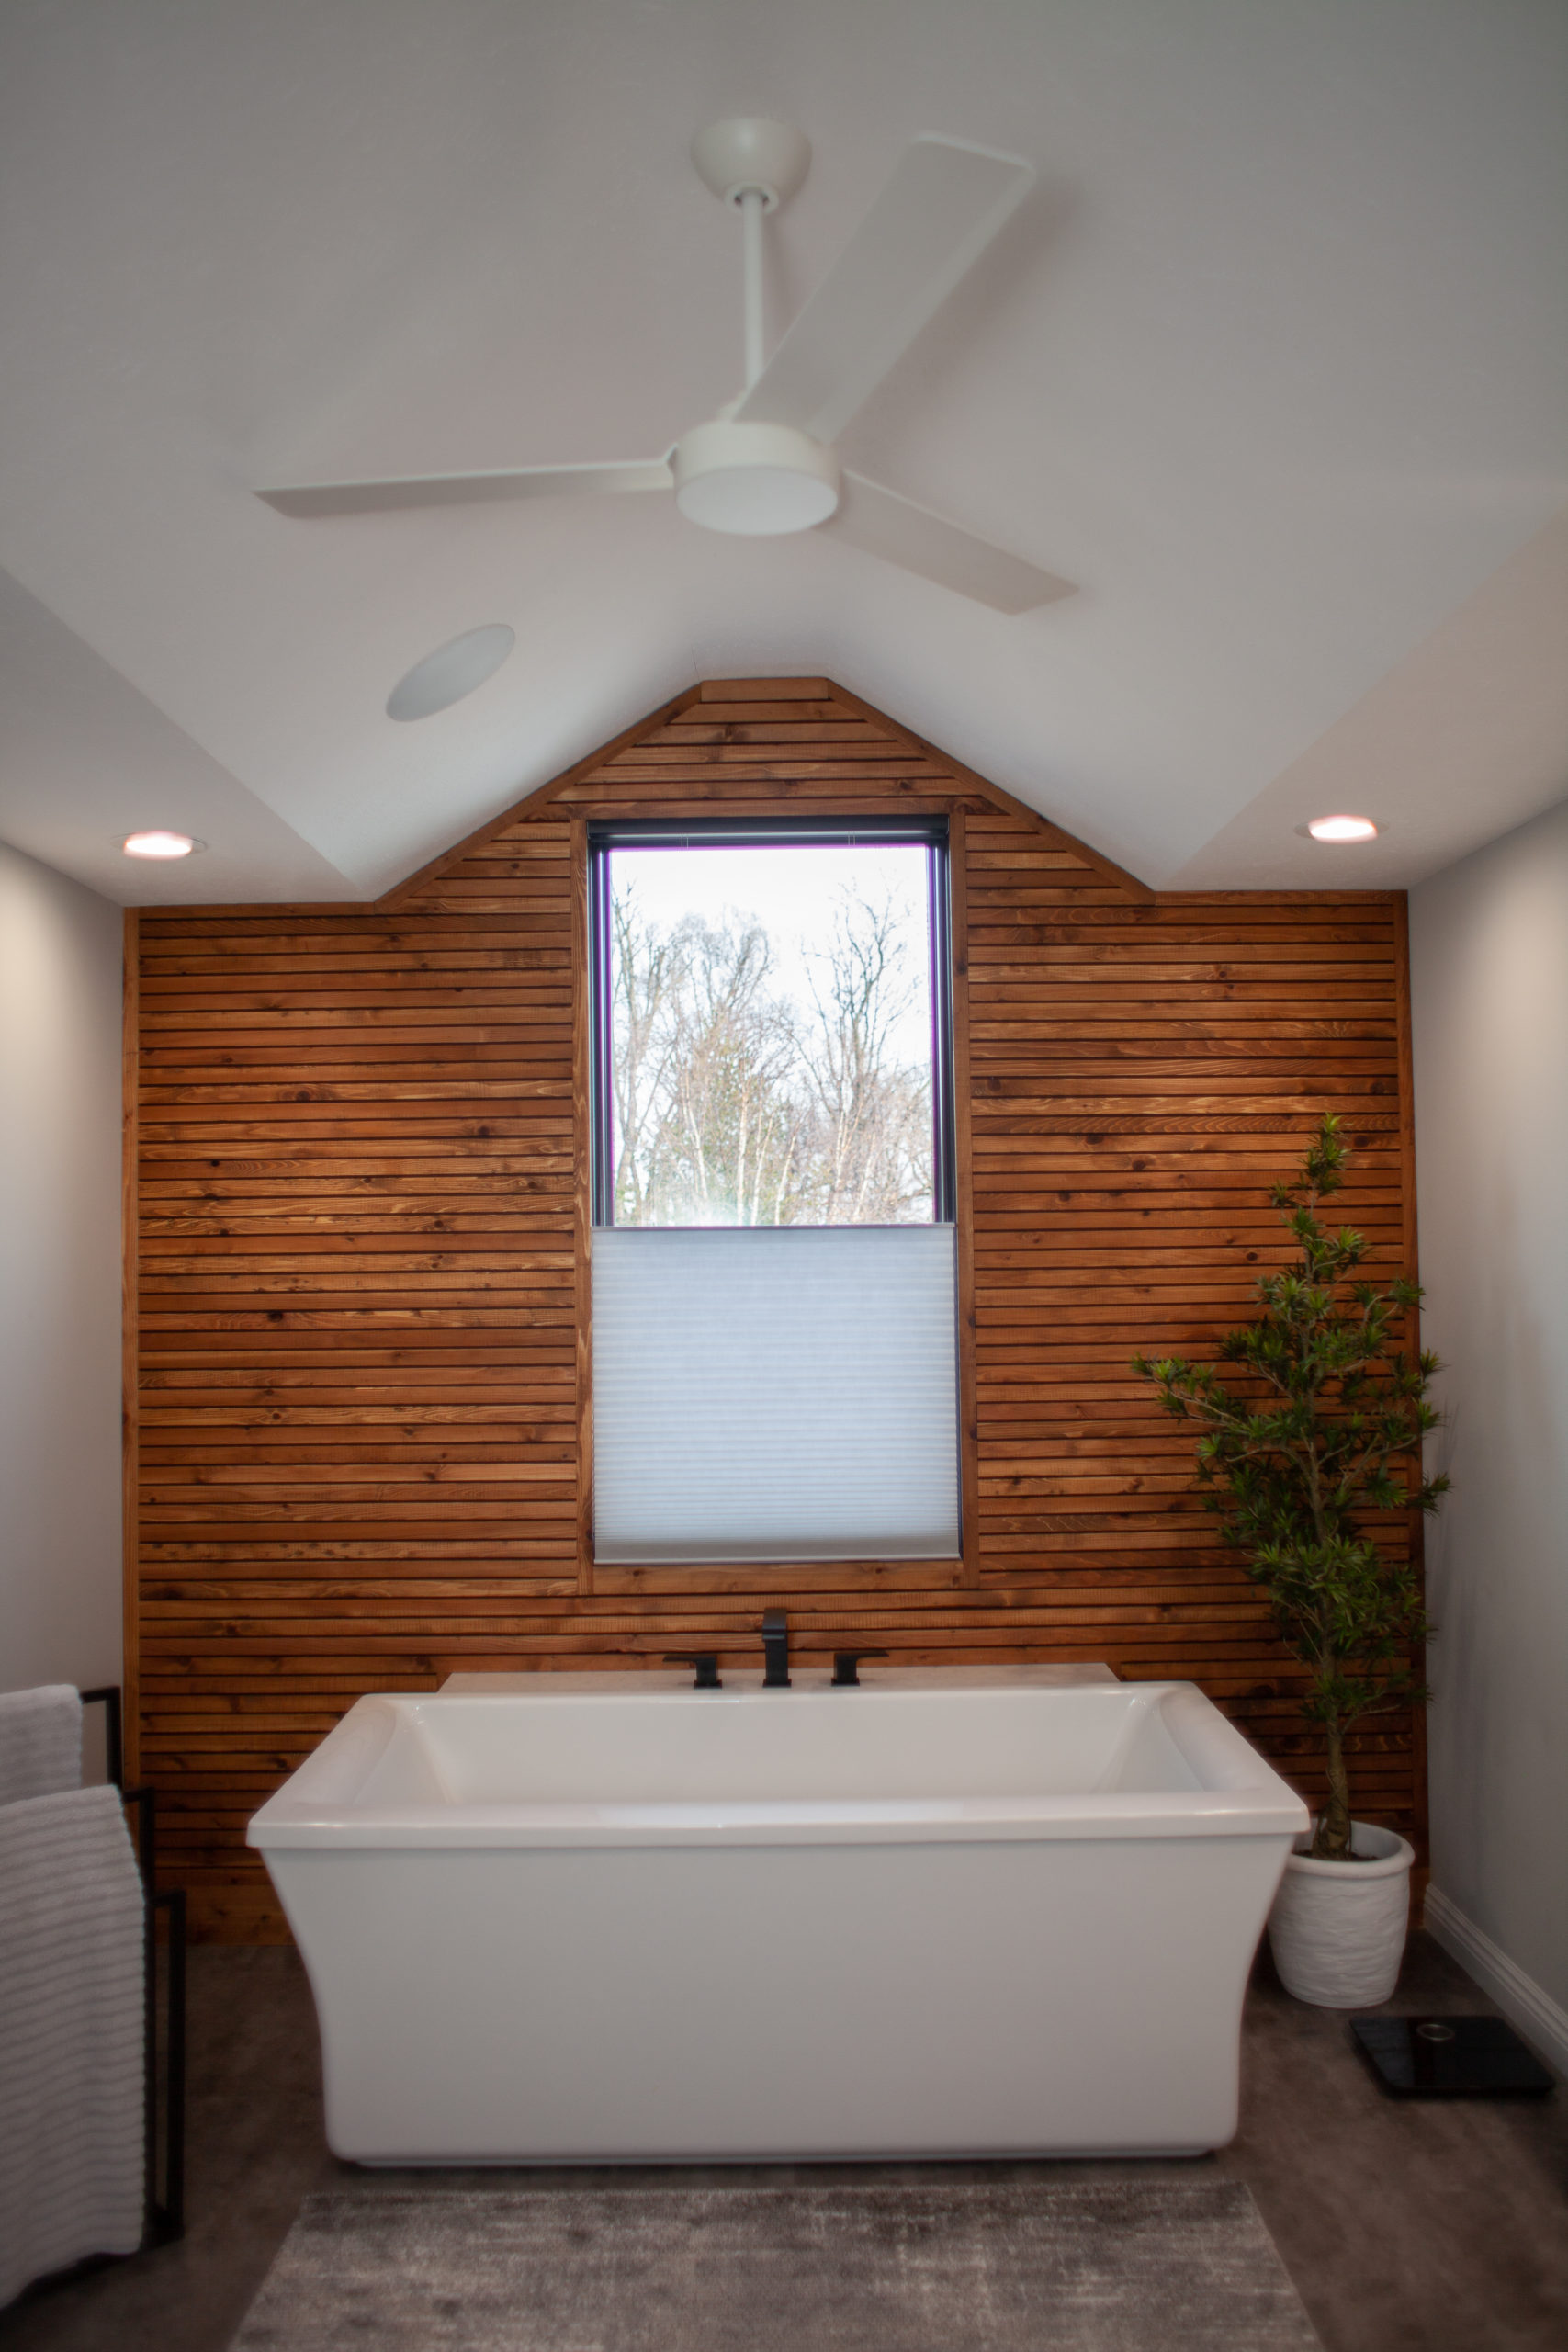 Case Study: Smart Shades Bridge the Gap in the Connected Home